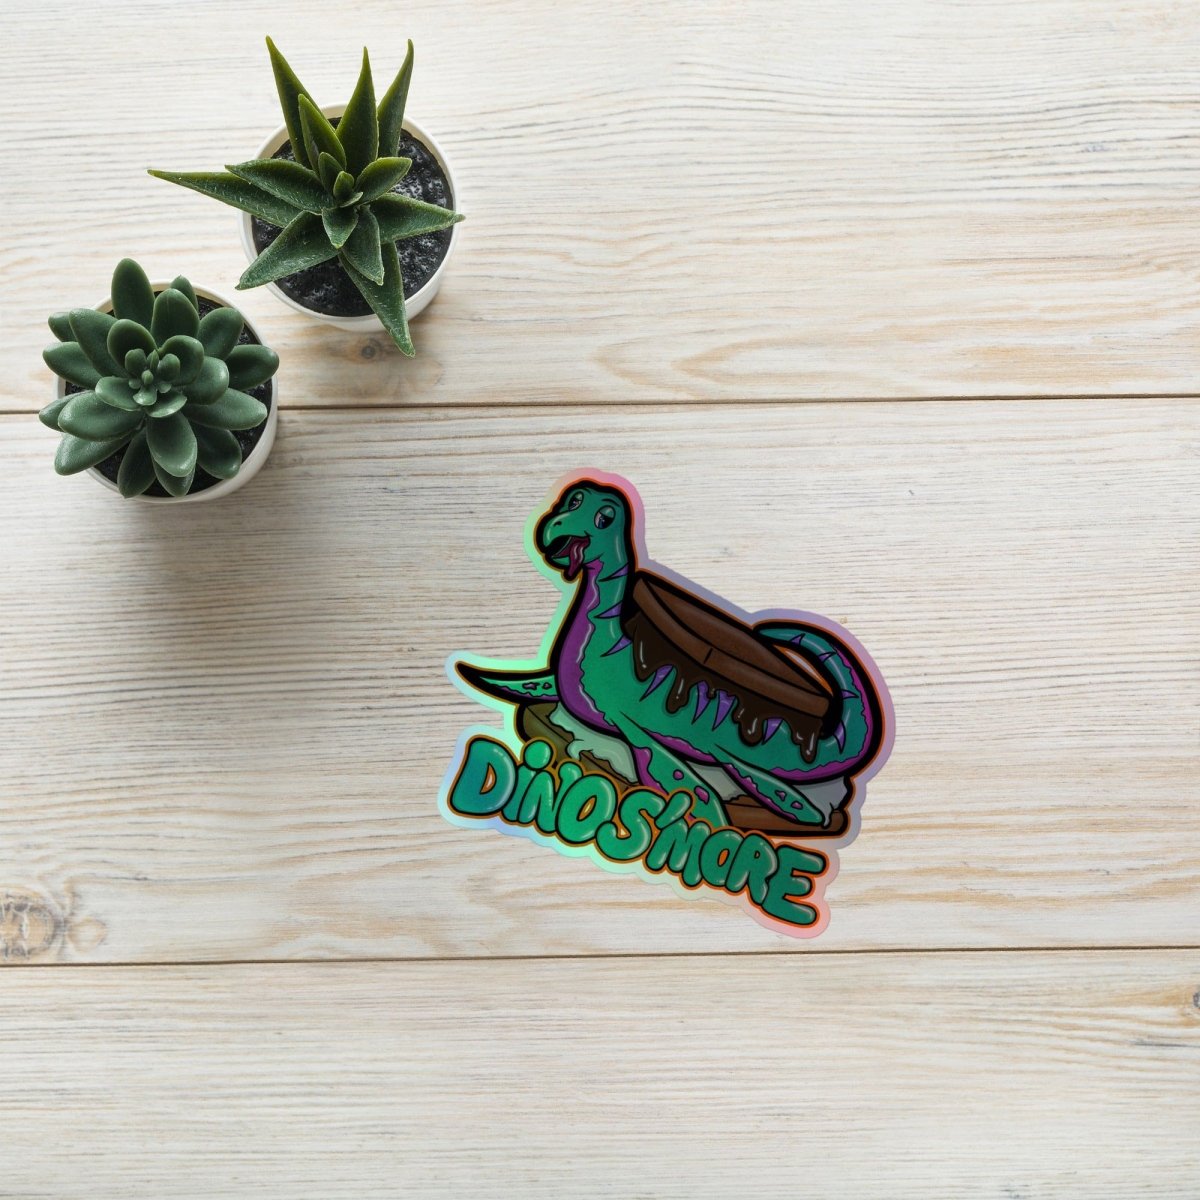 Dino S'more // Holographic stickers - Maux Zachintosh